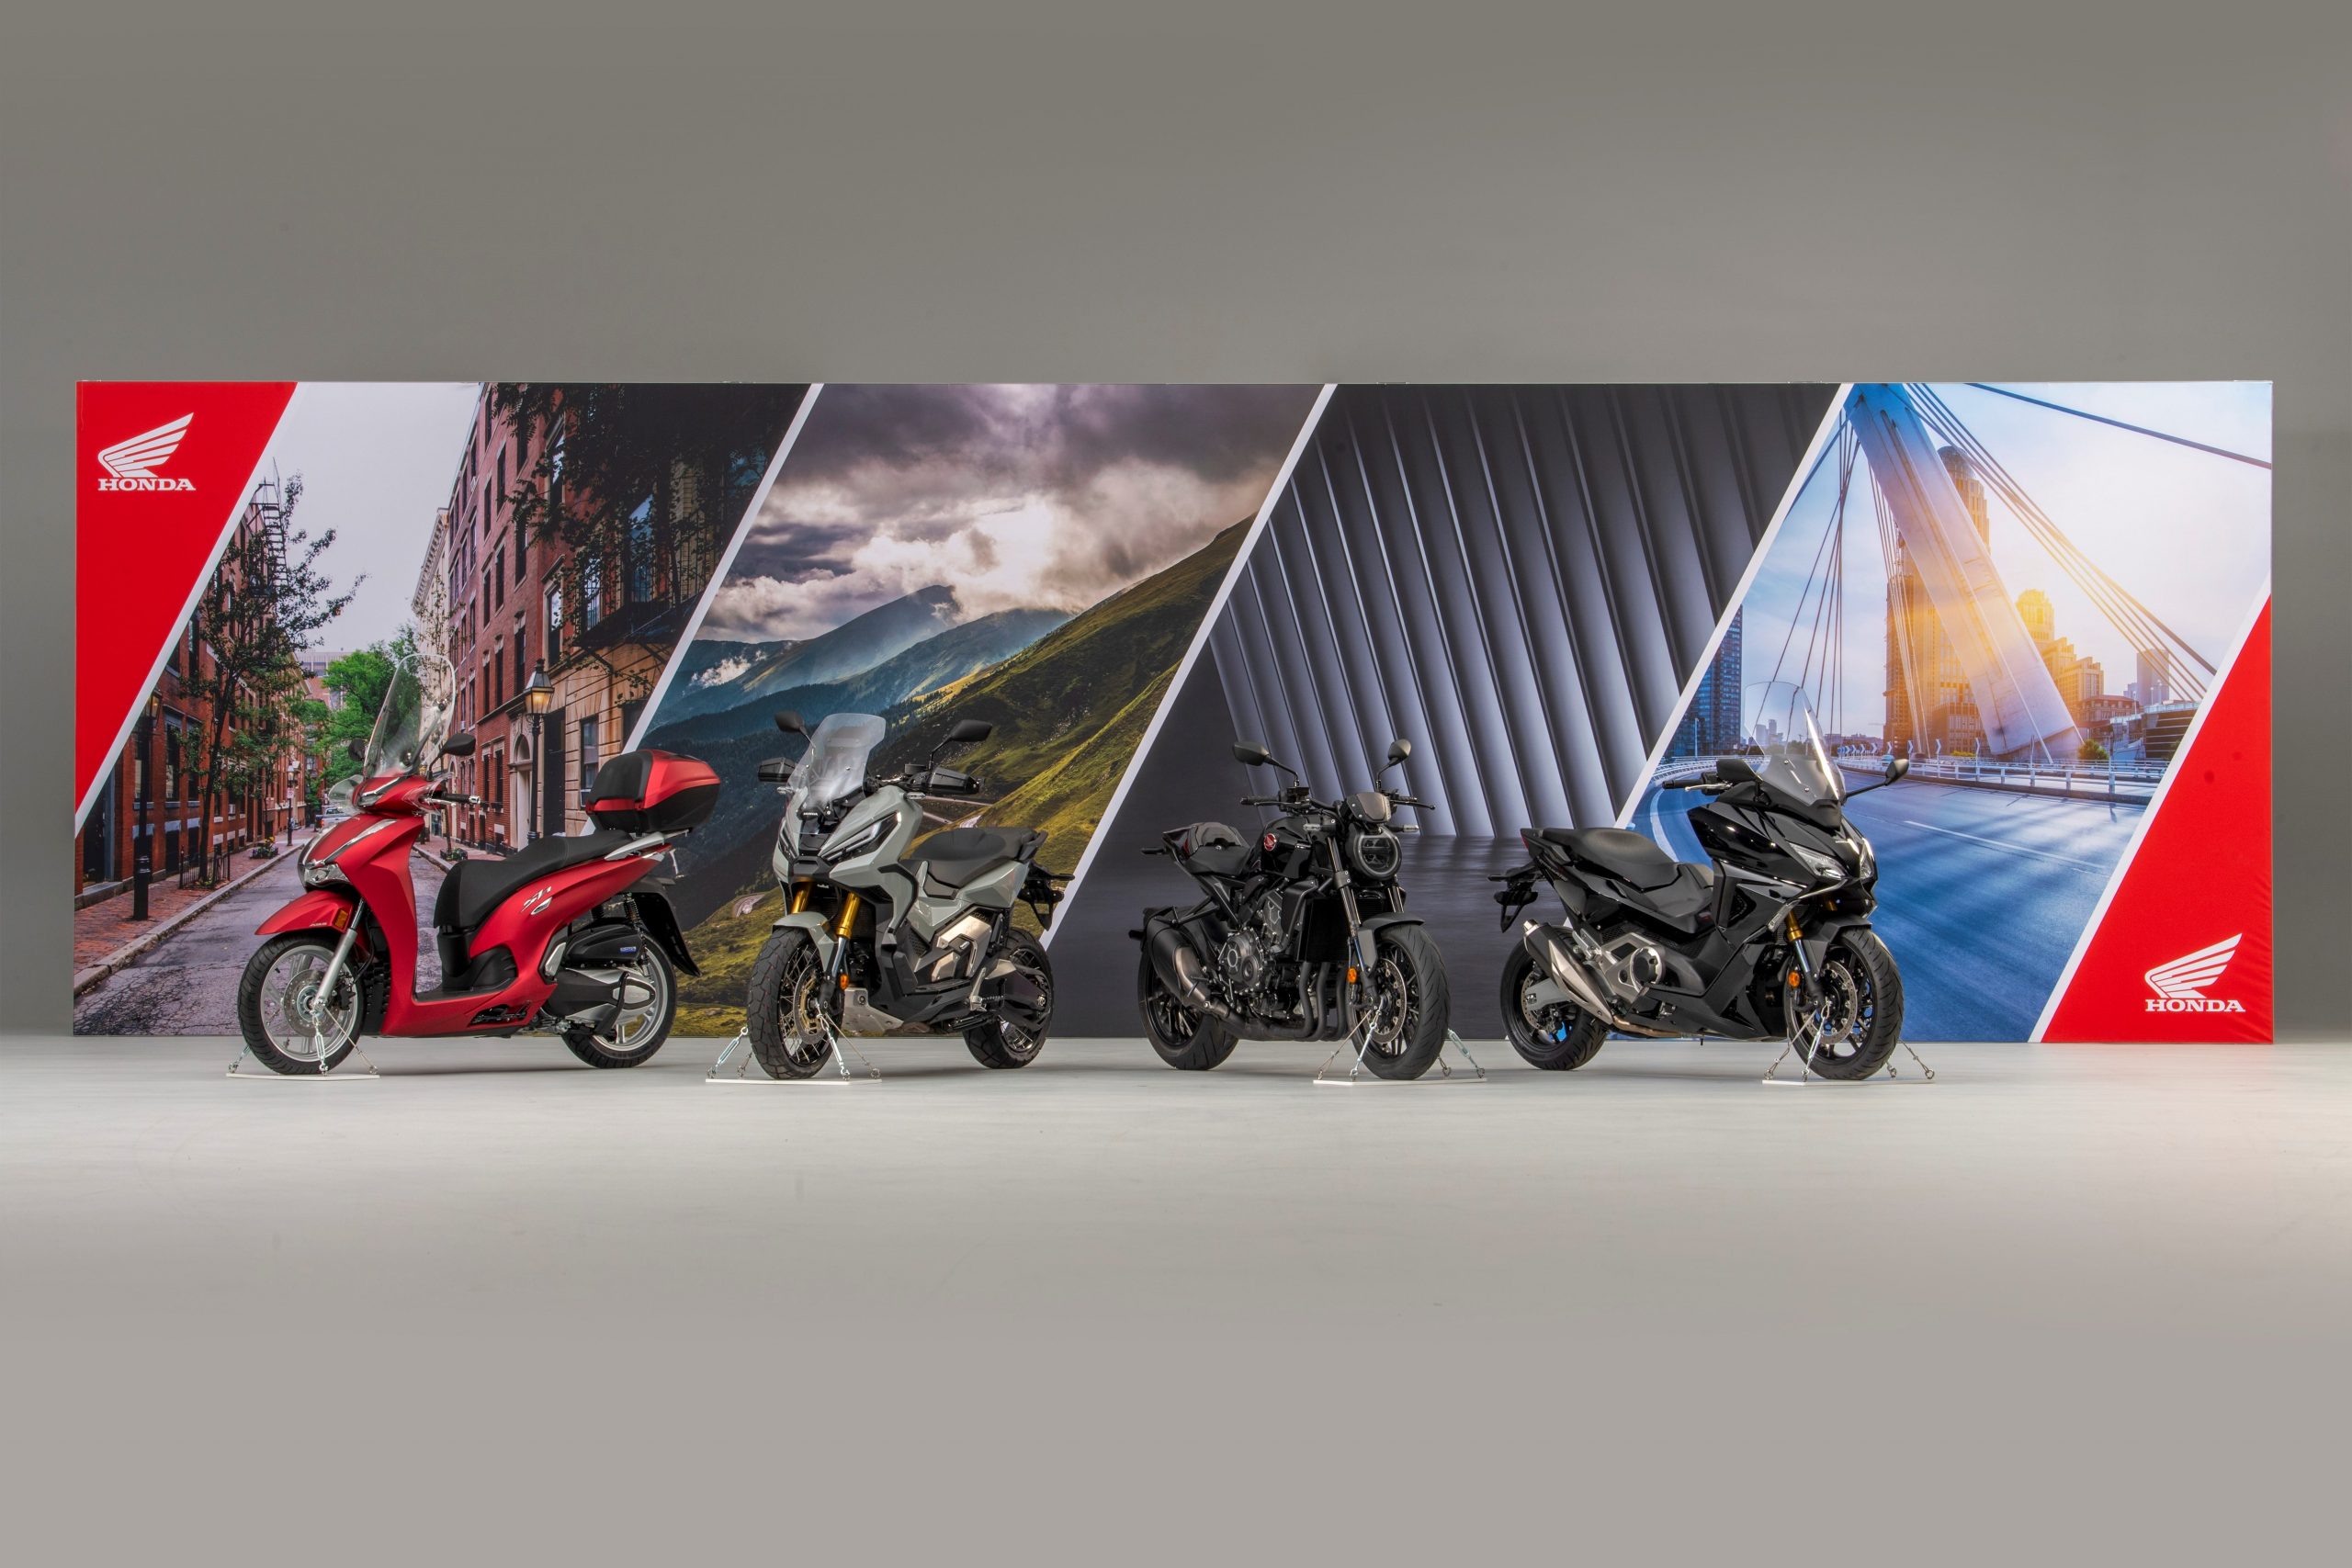 313703 Honda Announce Seven More Additions To Its Comprehensive 2021 European Scaled